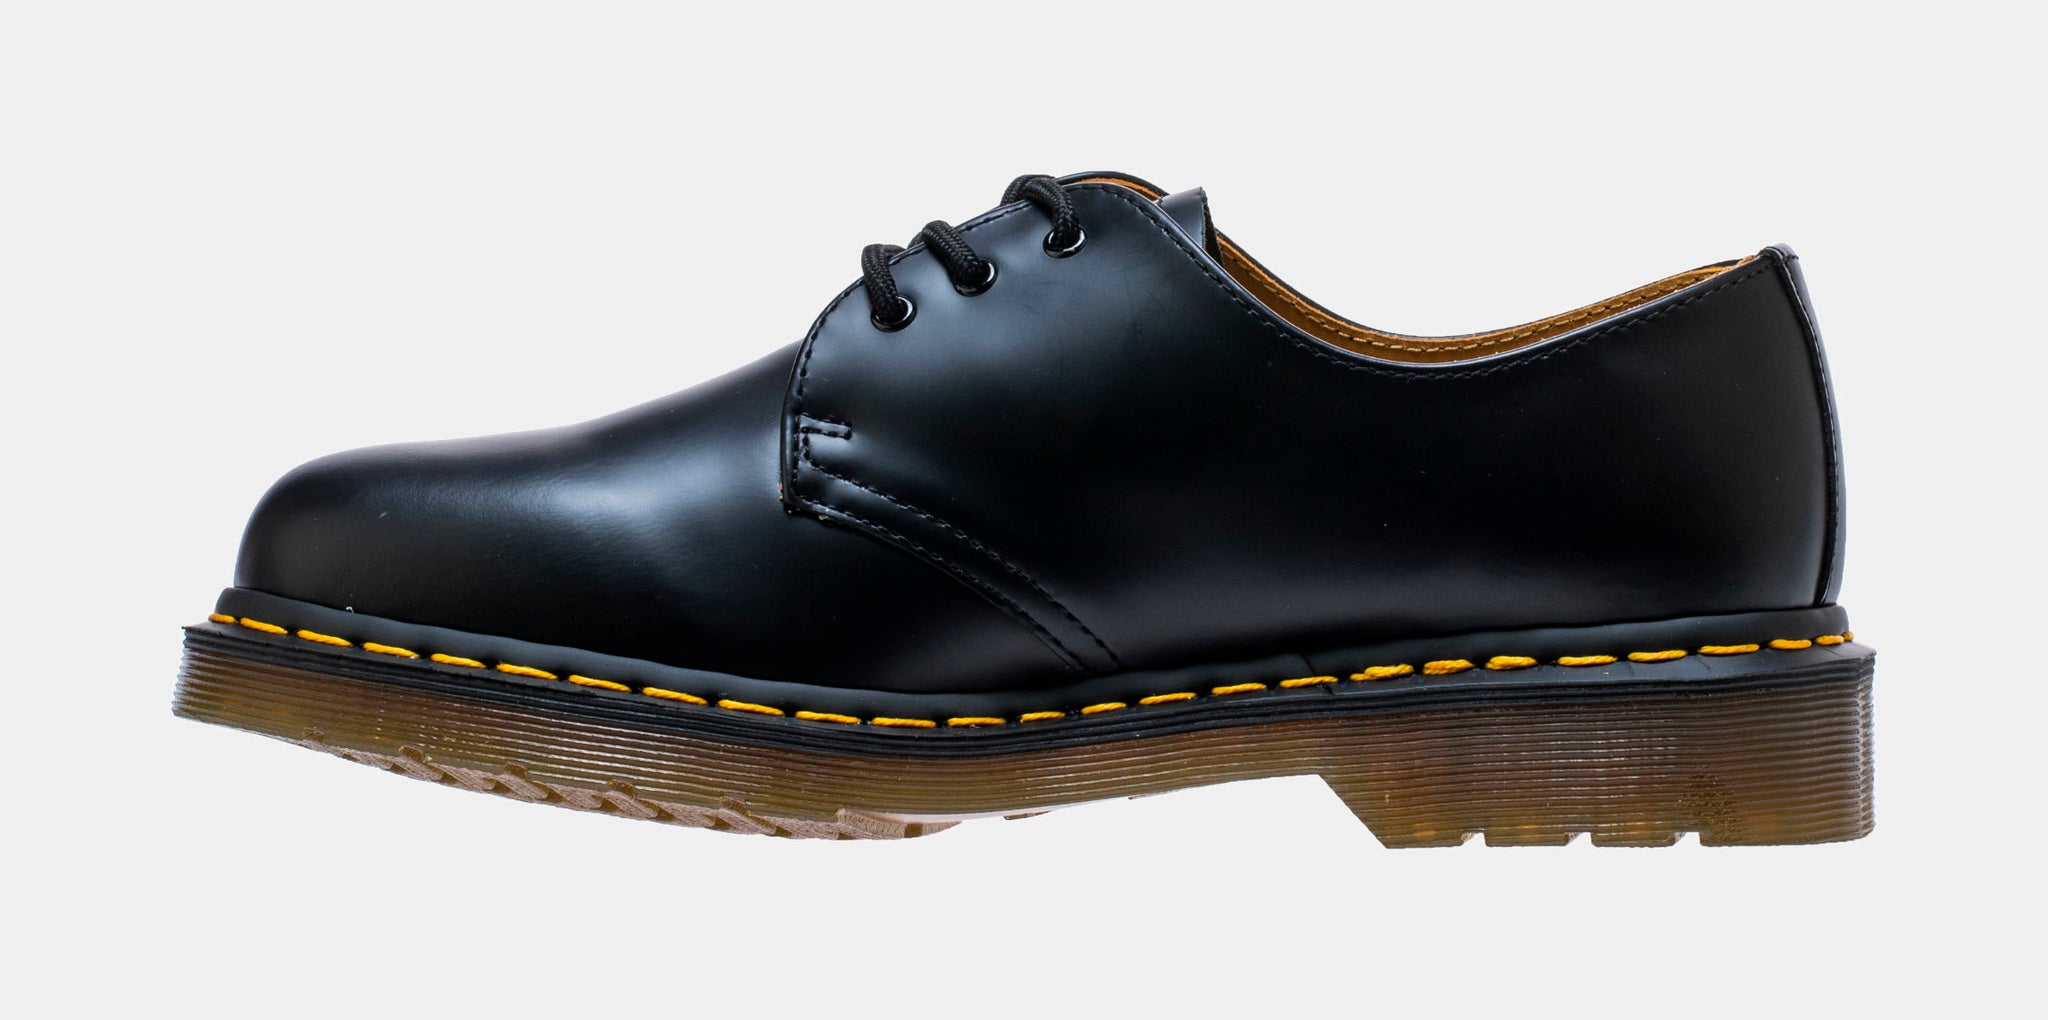 Verplaatsing Componist Rennen Dr. Martens 1461 Smooth Mens Lifestyle Shoe Black r11838002 – Shoe Palace